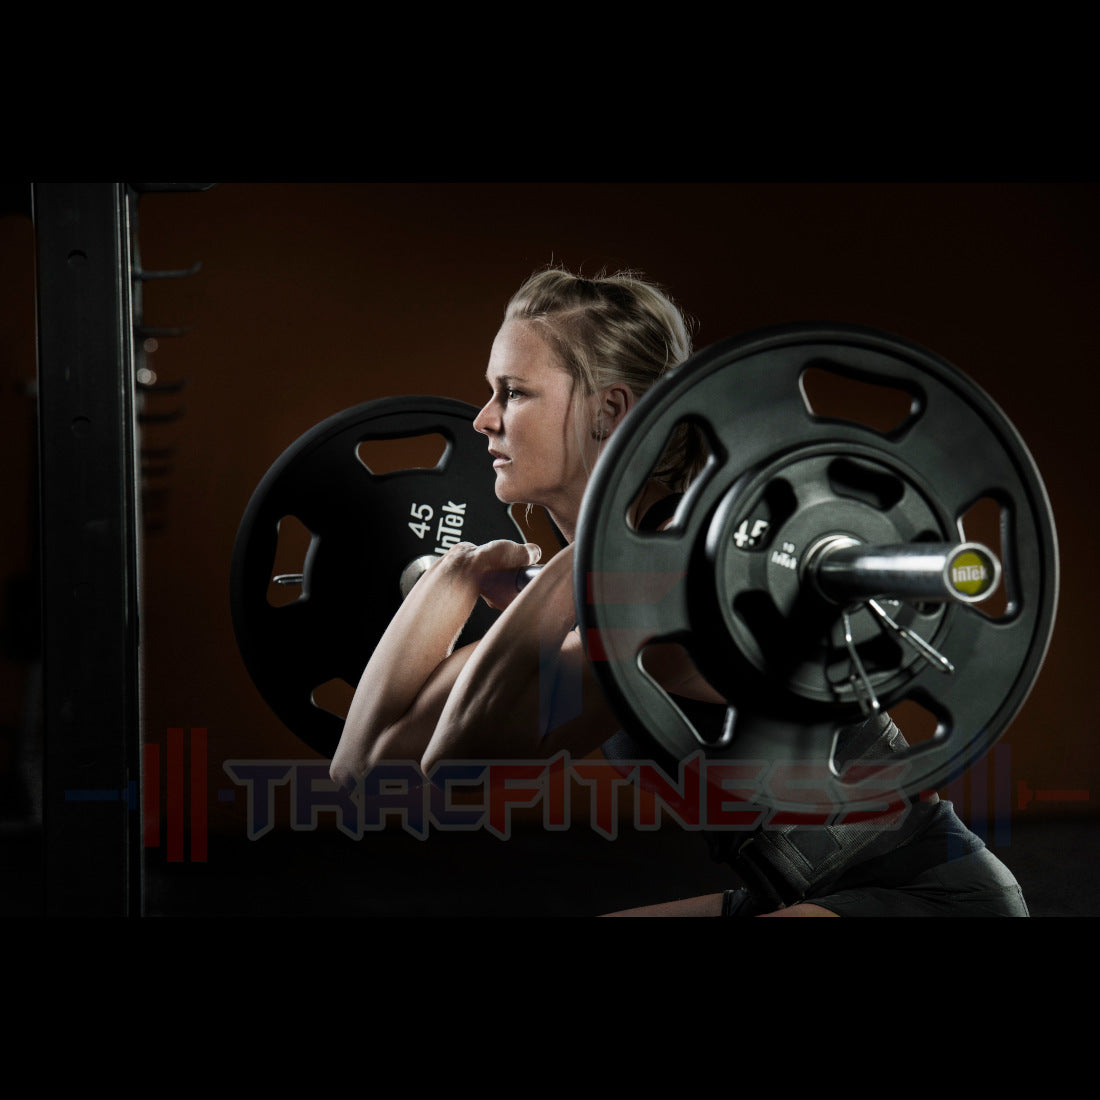 Intek 15kg Woman's Power Bar in Action with Intek Weights